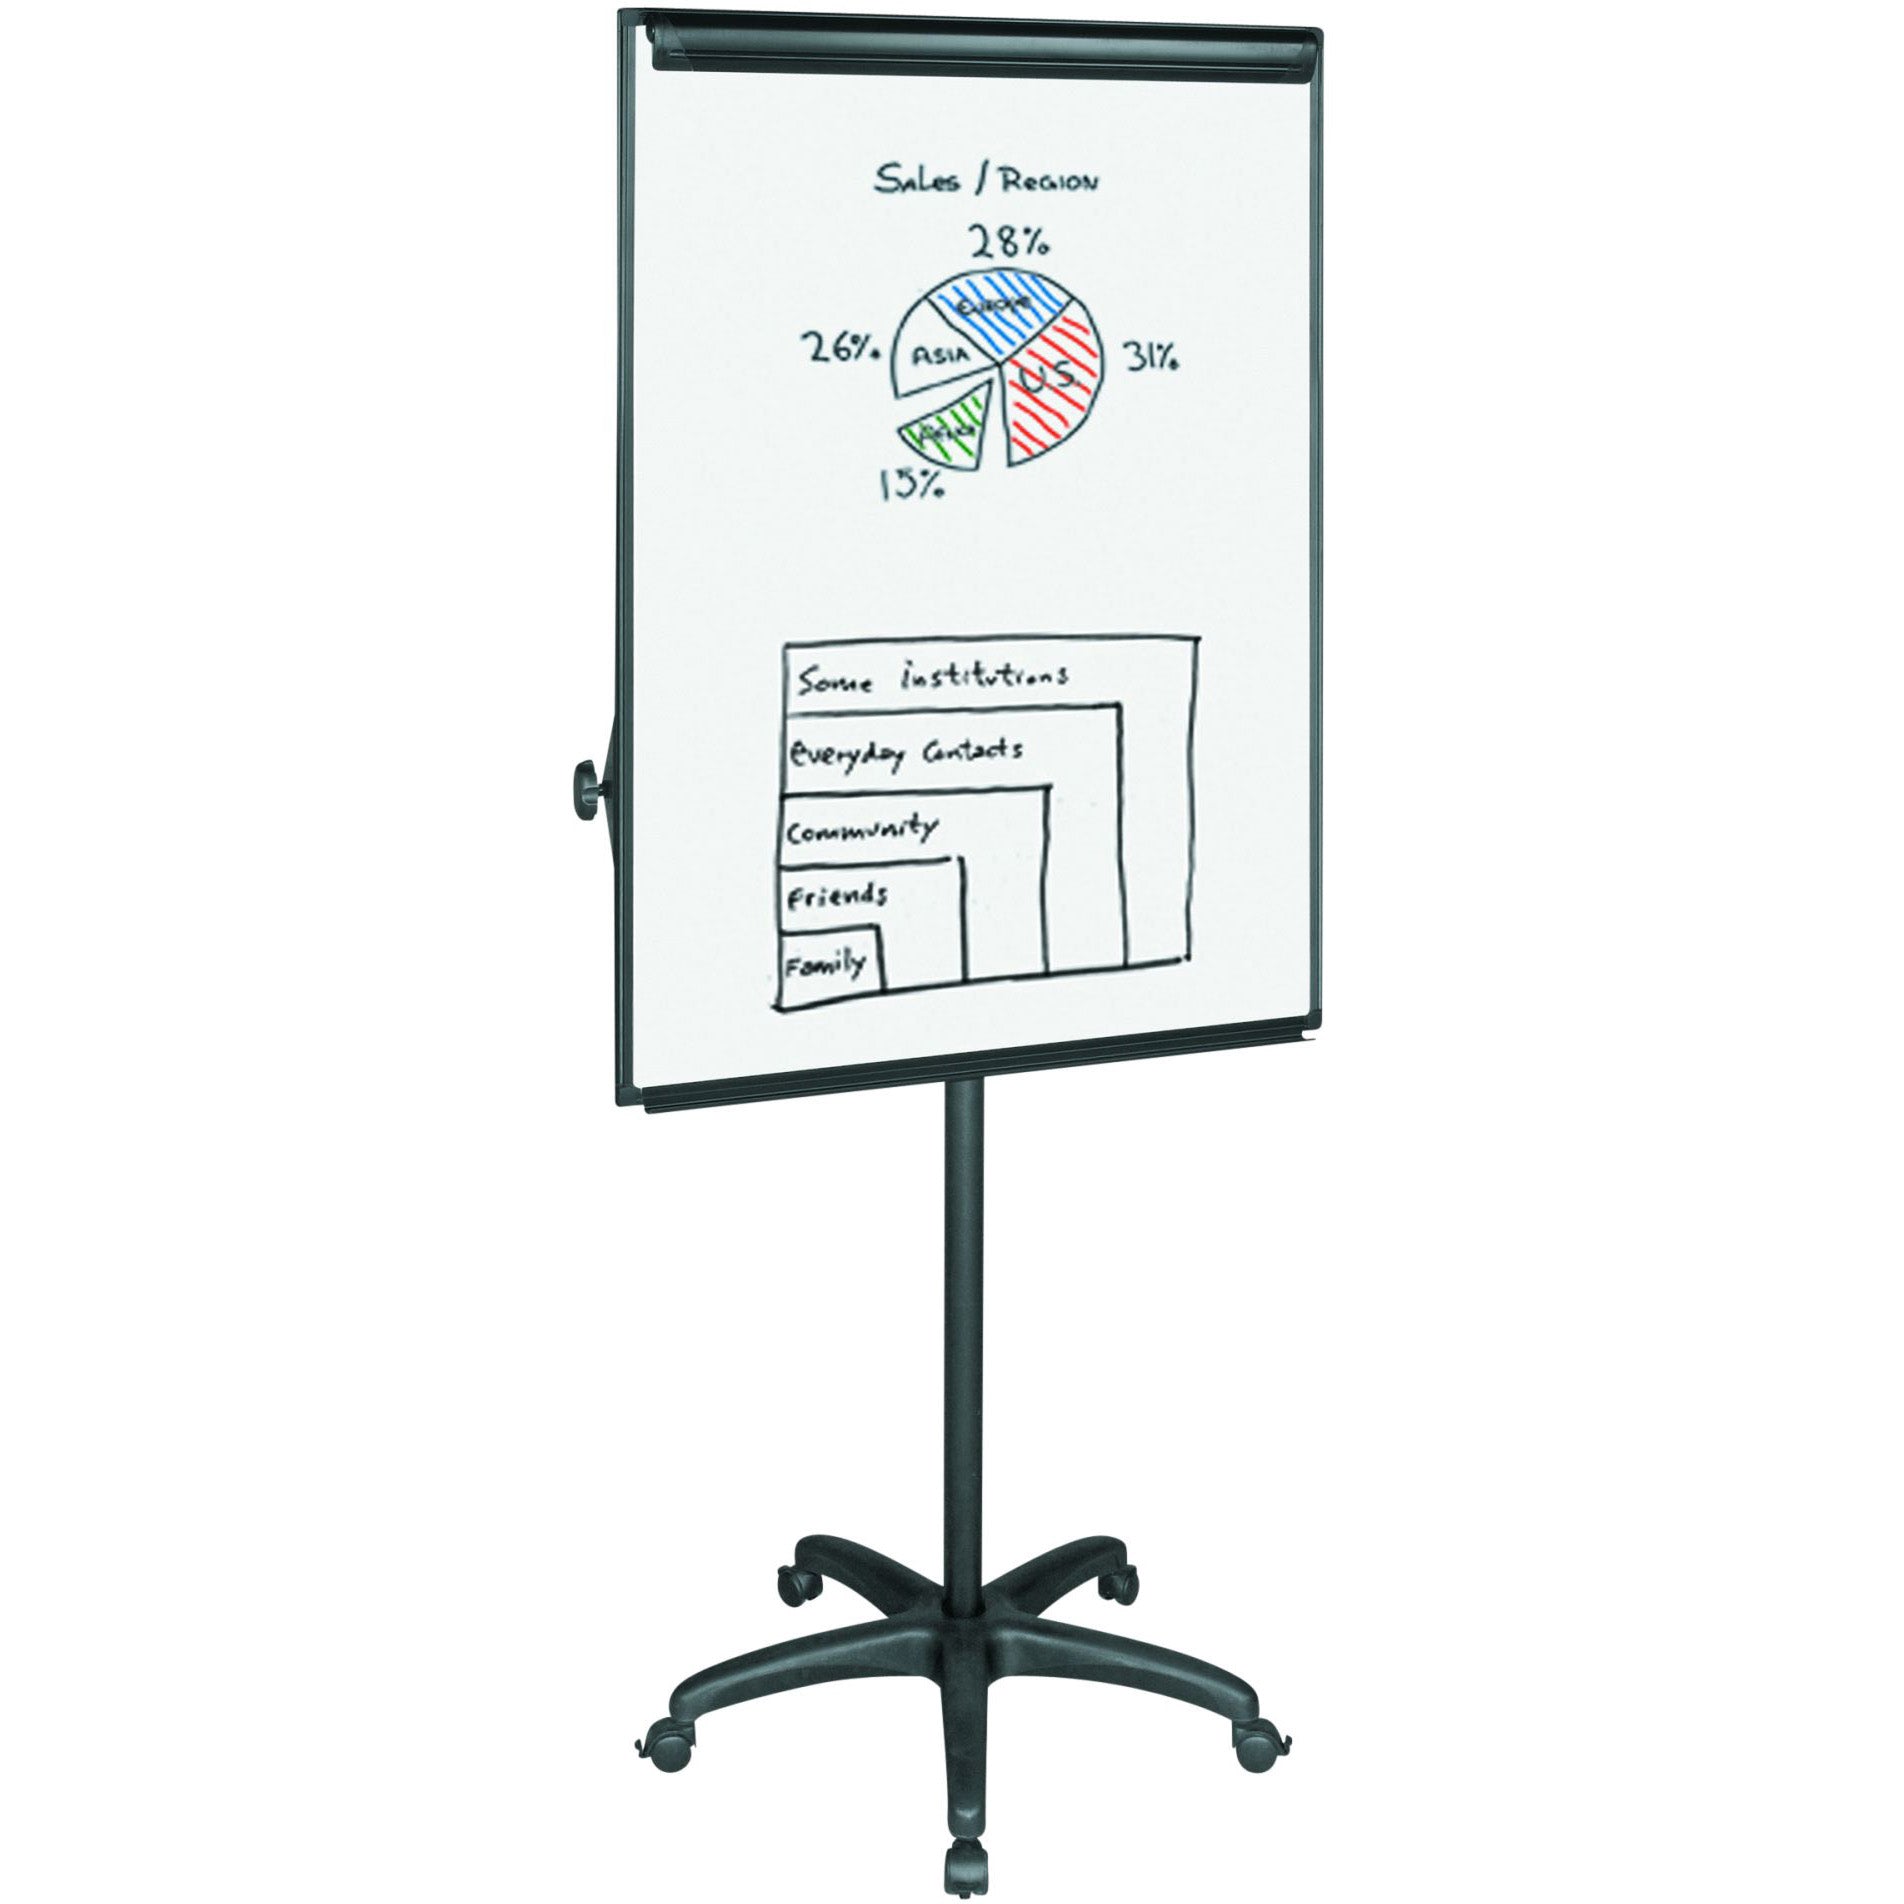 EA4800055 Mobile Magnetic Dry Erase White Board Easel, Easel Pad Holder, Full Length Marker Tray, Locking Casters, 42" x 30", Black Aluminum Frame by MasterVision